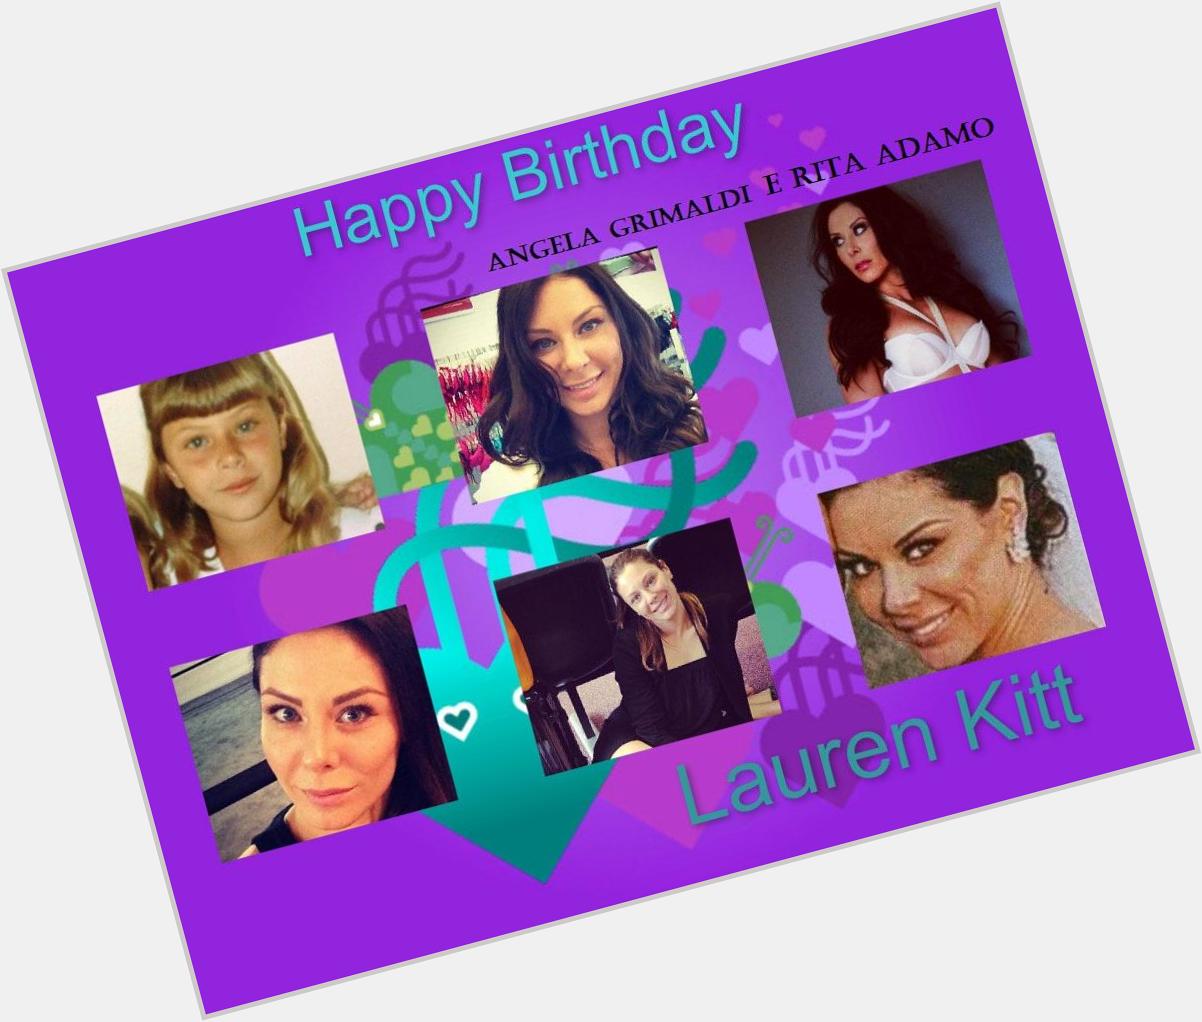  Happy BDay Lauren Kitt Carter <3 I love You this is for u by my and my friend 